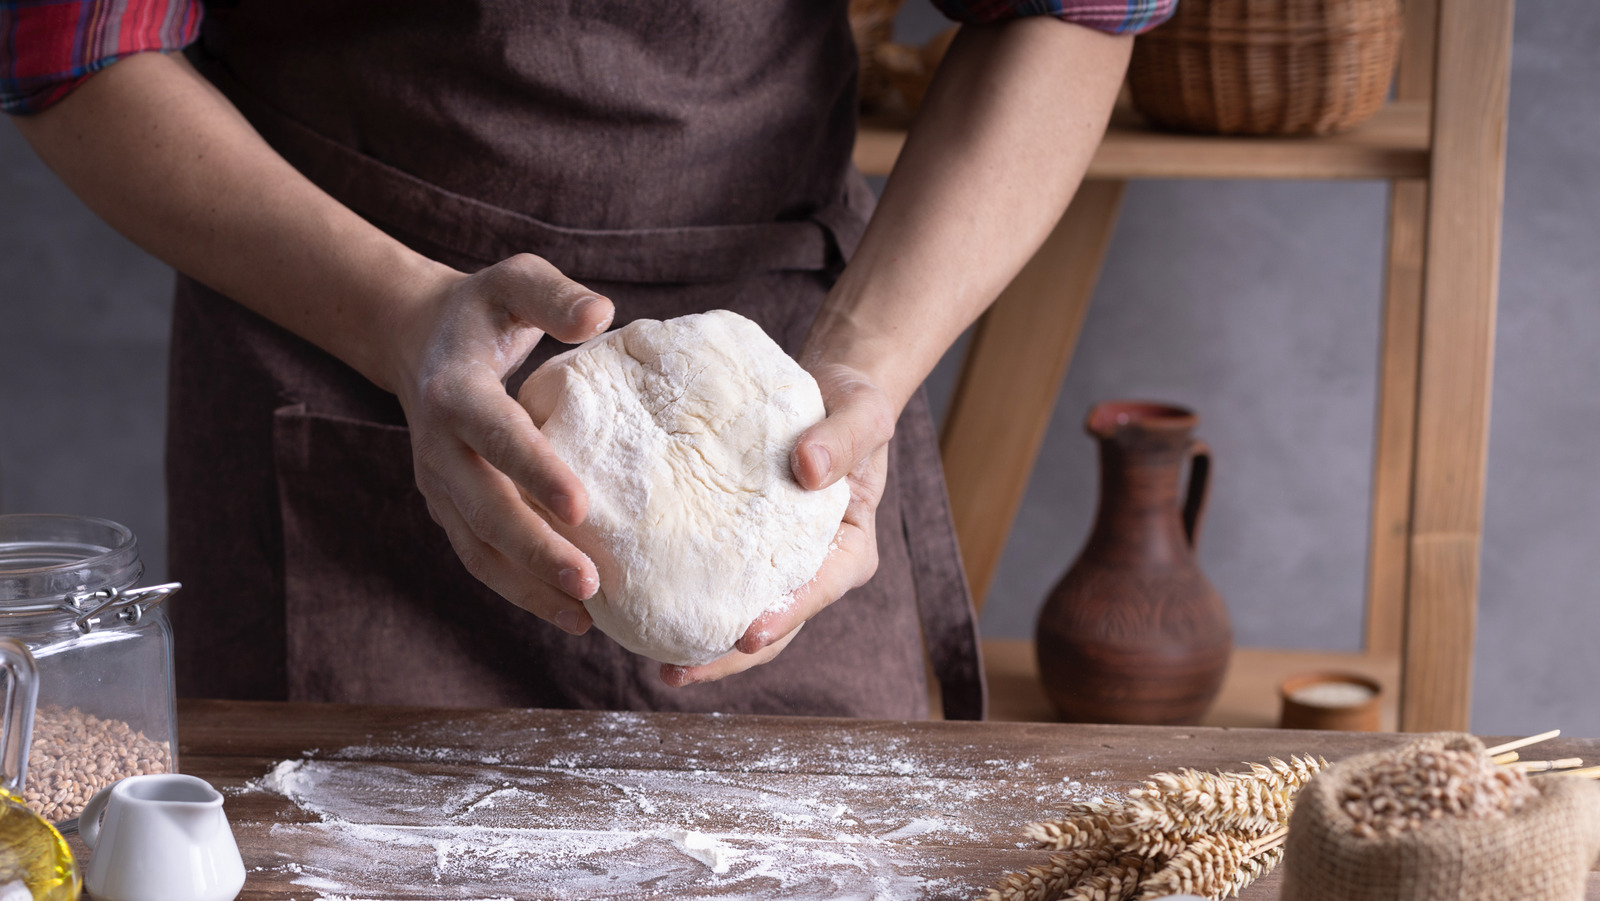 https://www.tastingtable.com/img/gallery/why-you-should-always-knead-bread-dough-by-hand/l-intro-1652977262.jpg